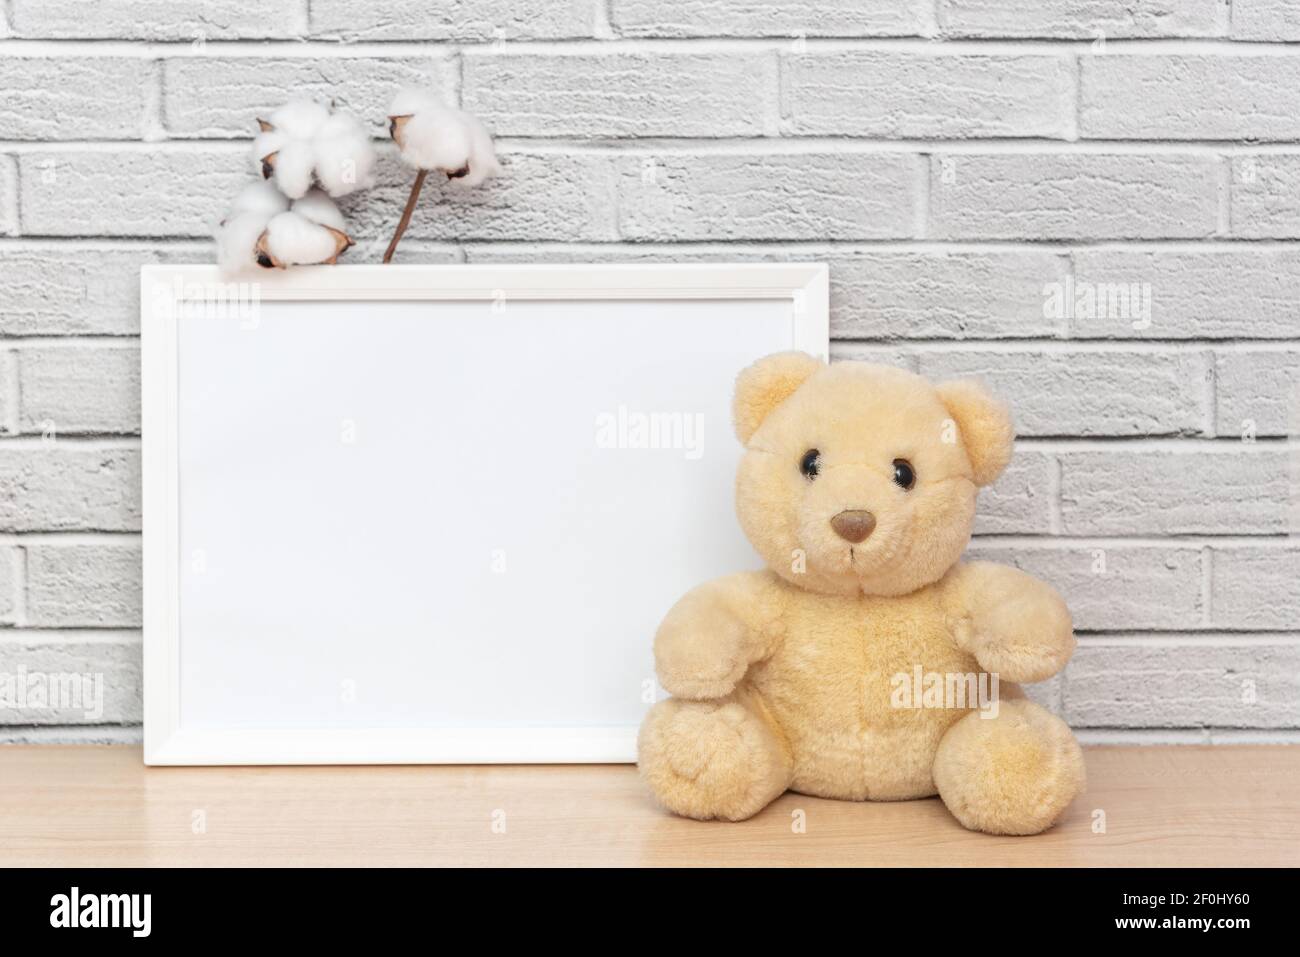 Teddy bear on wood Old Brick Wall as a background or wallpaper Stock Photo   Alamy